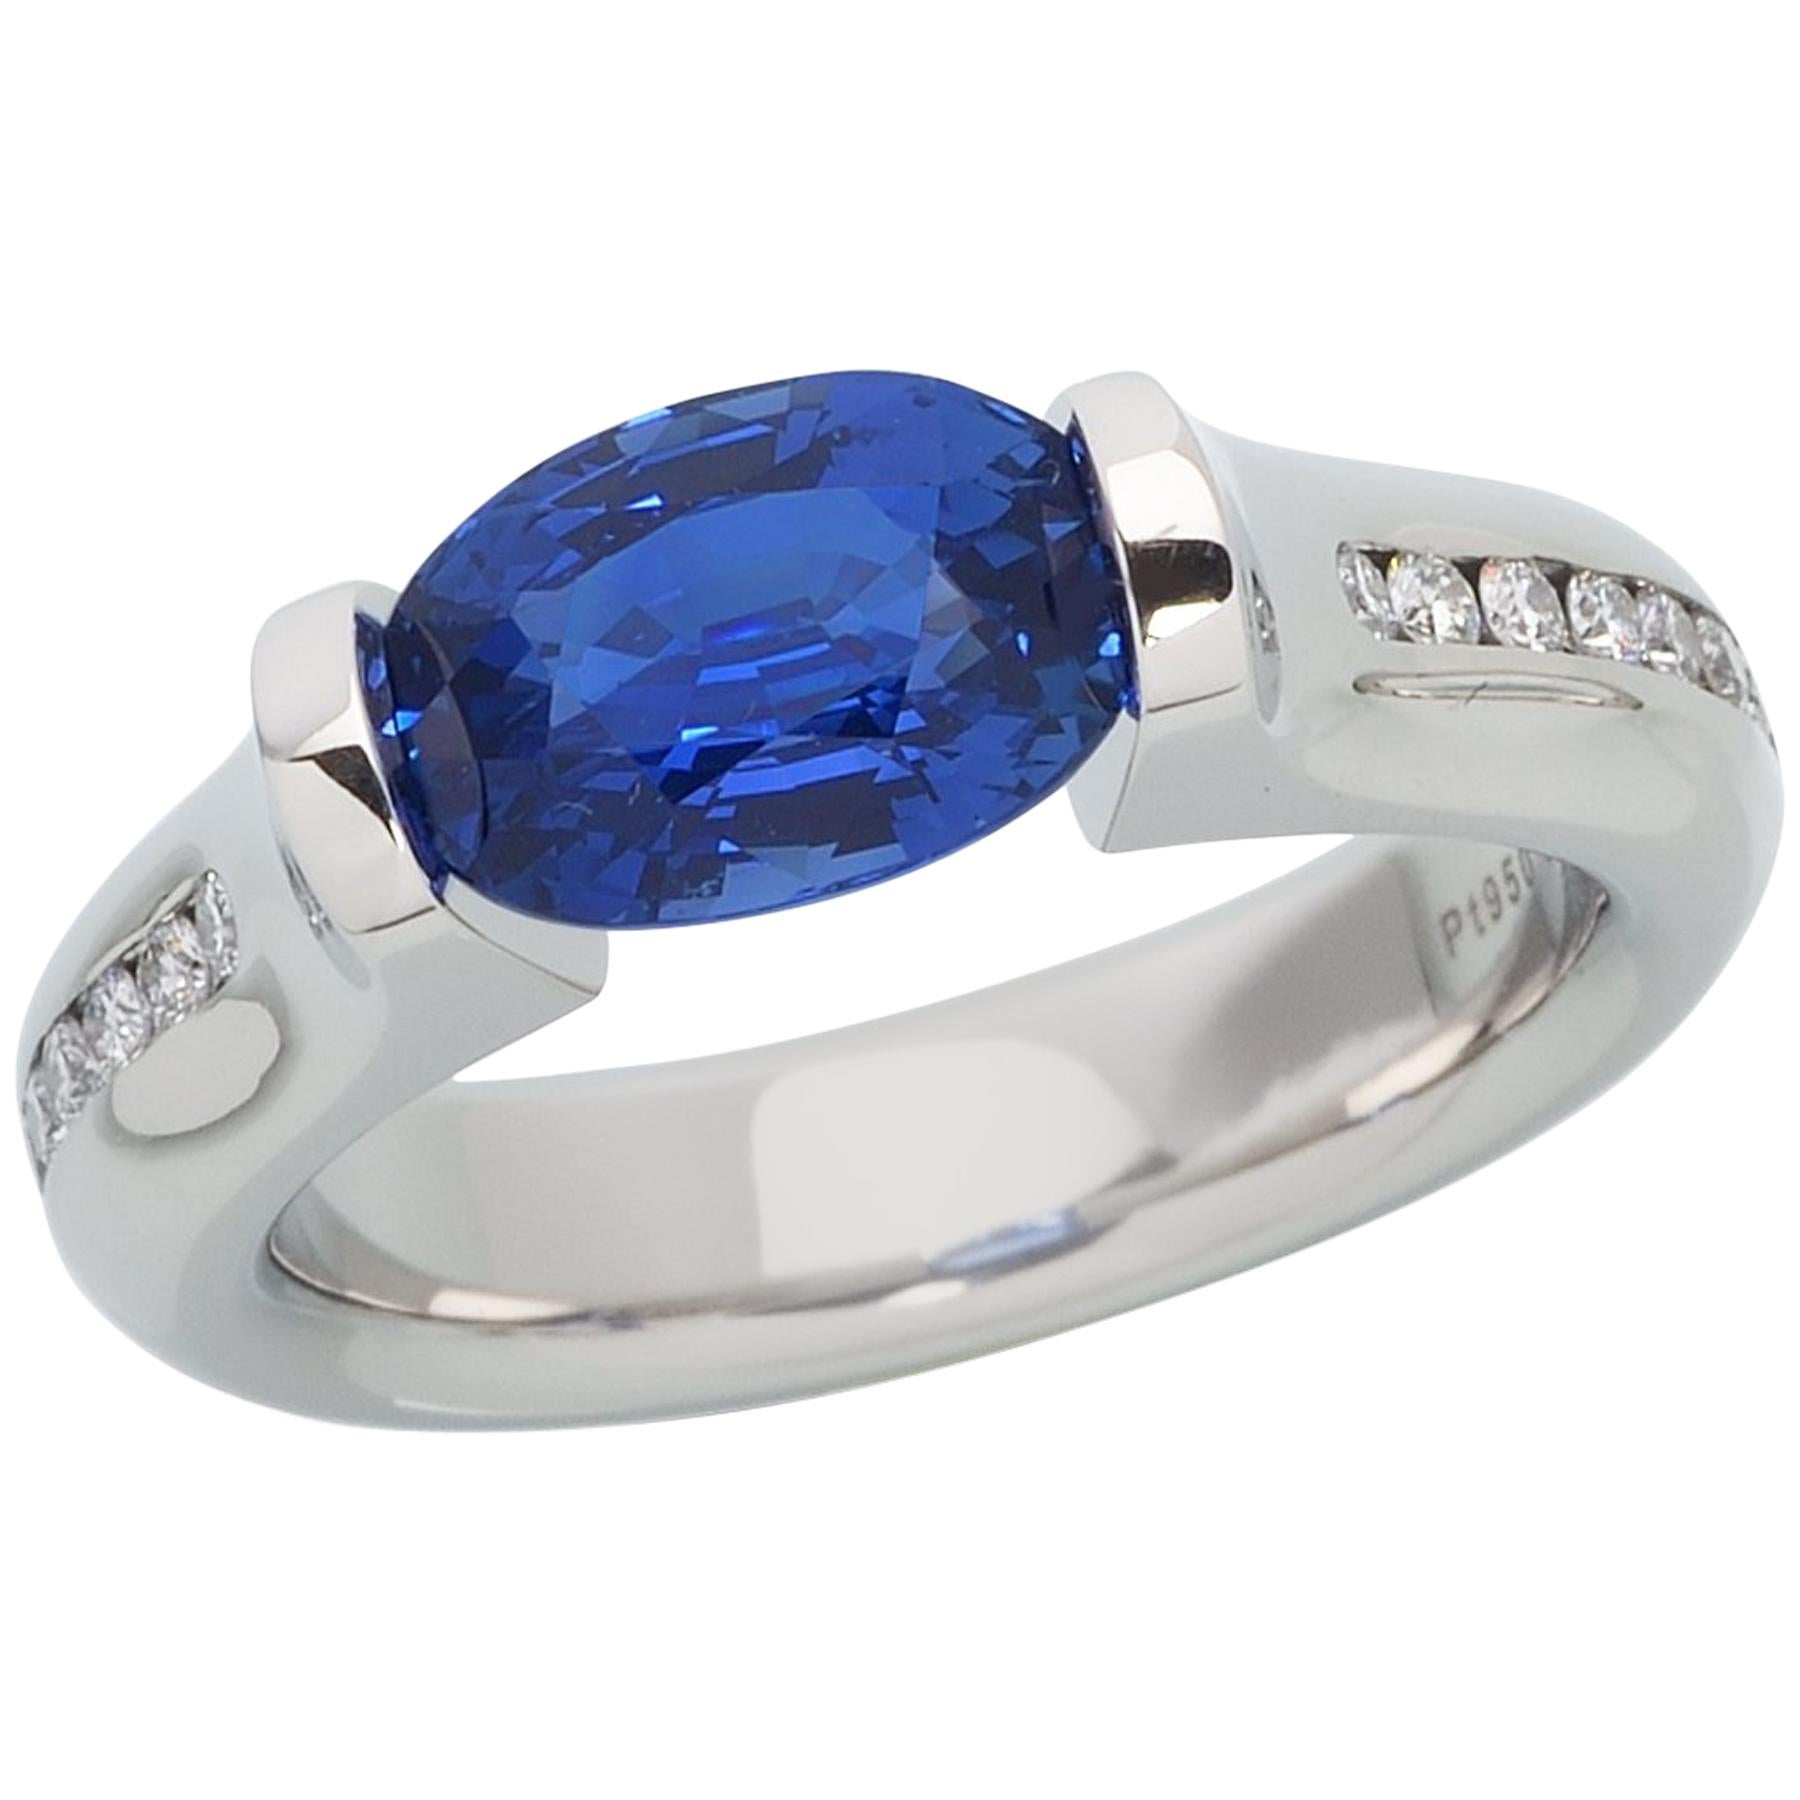 Steven Kretchmer Omega Channel Ring with a Tension-Set Blue Sapphire For Sale